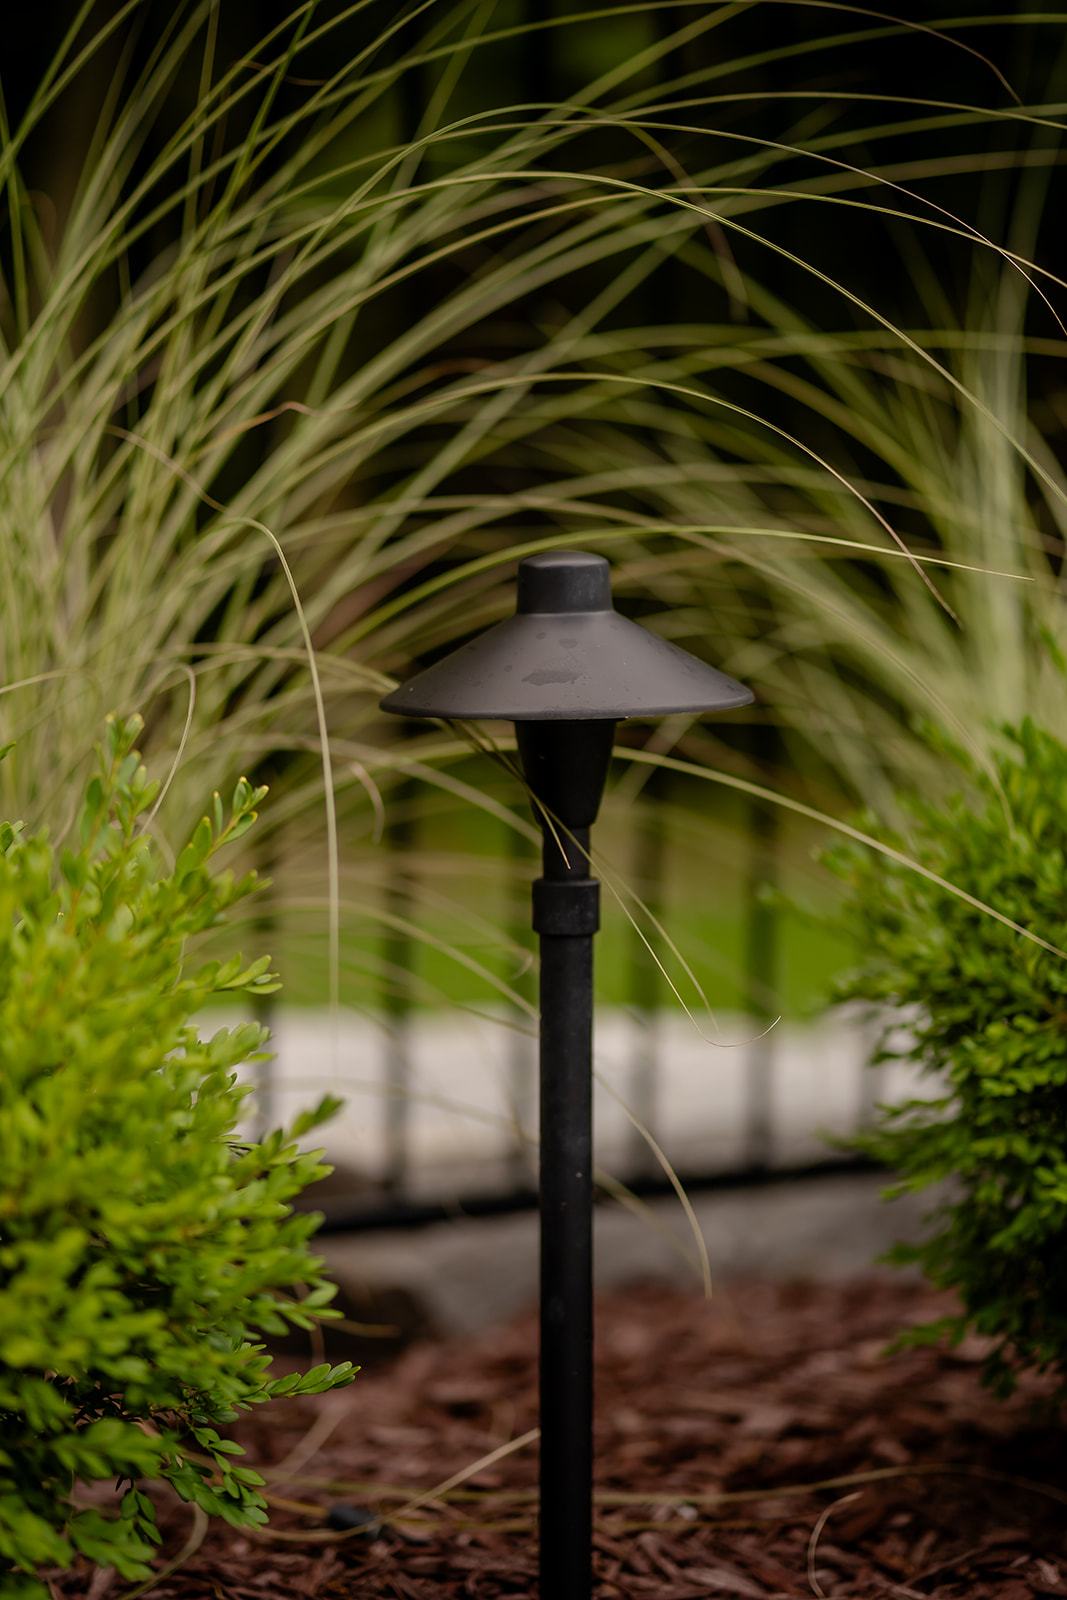 A lamp in the garden.